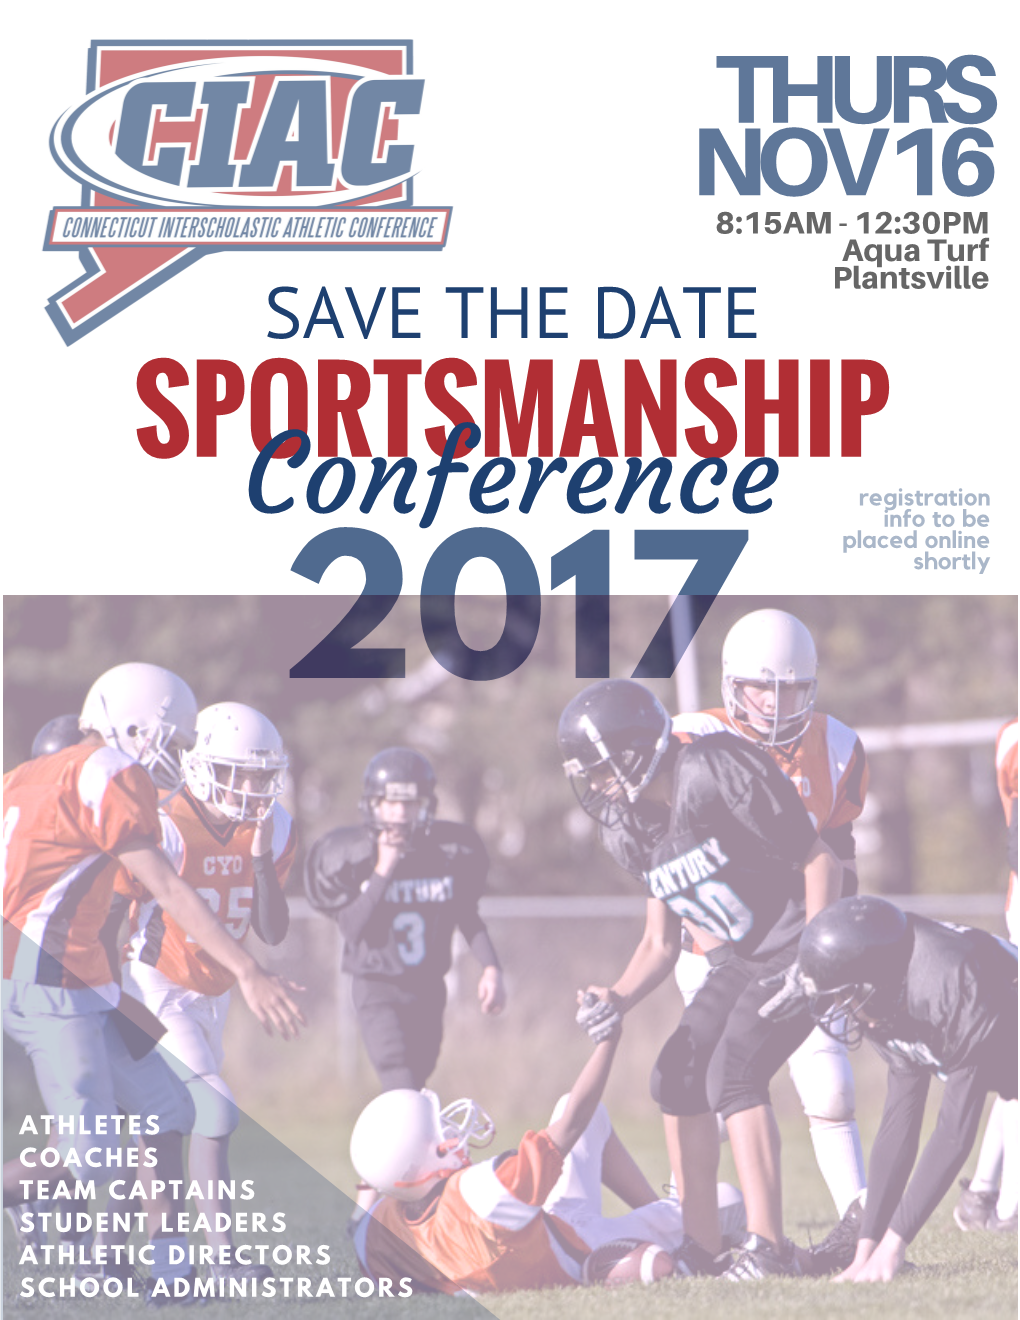 Sportsmanship Conference Save the Date